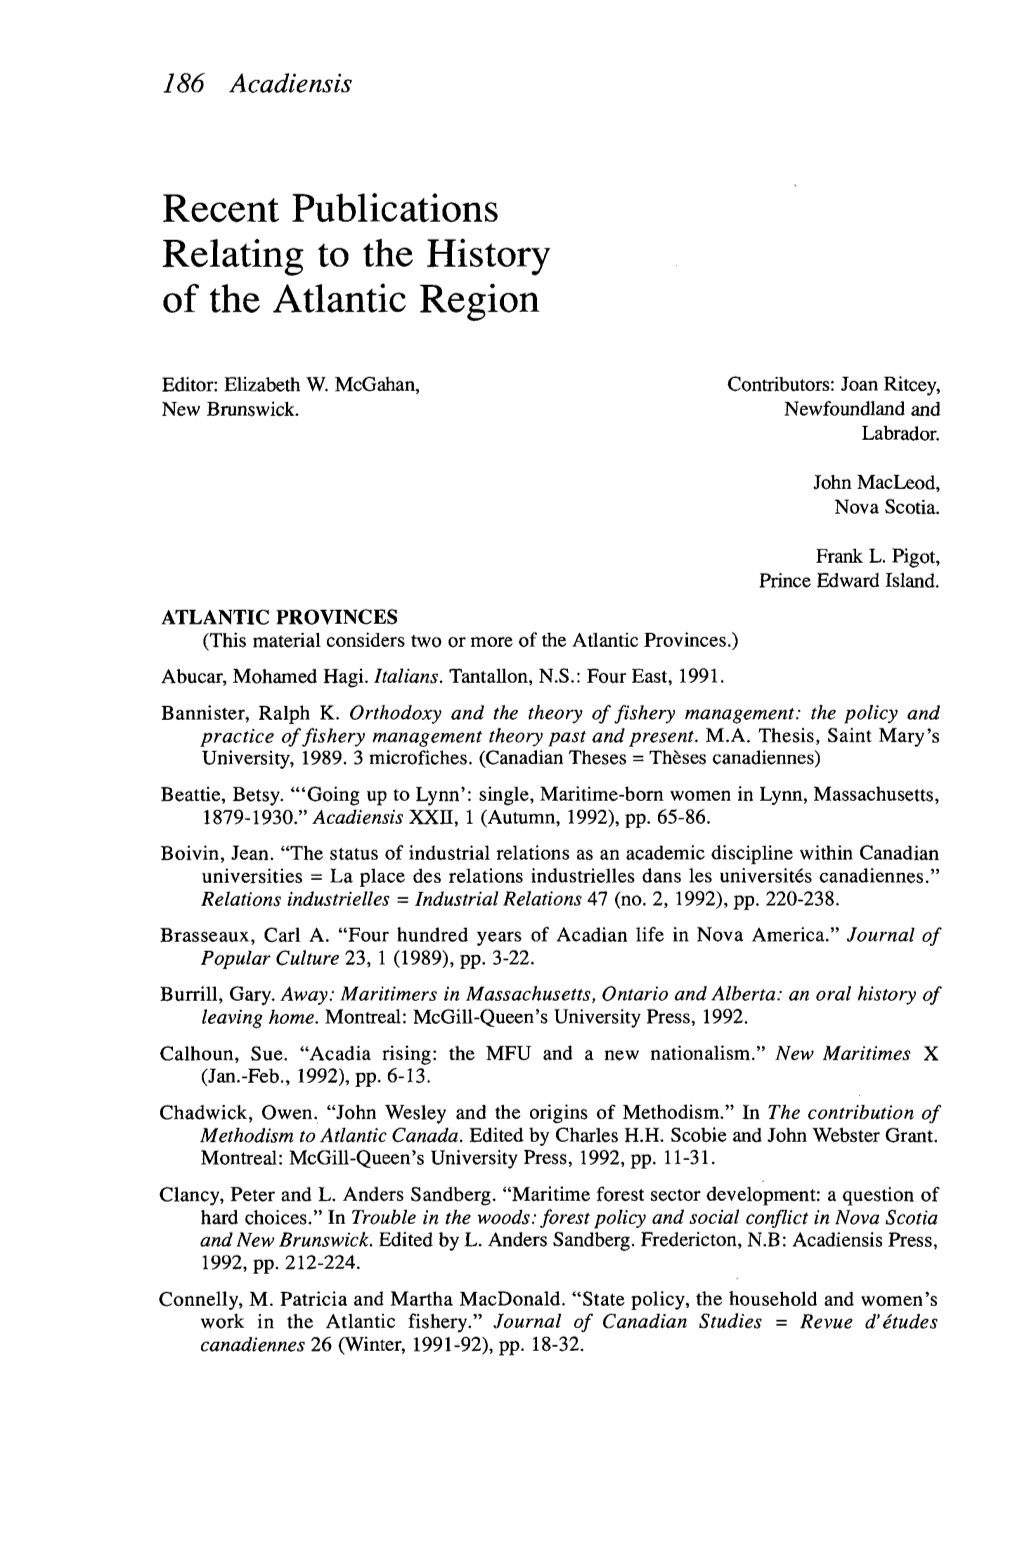 Recent Publications Relating to the History of the Atlantic Region